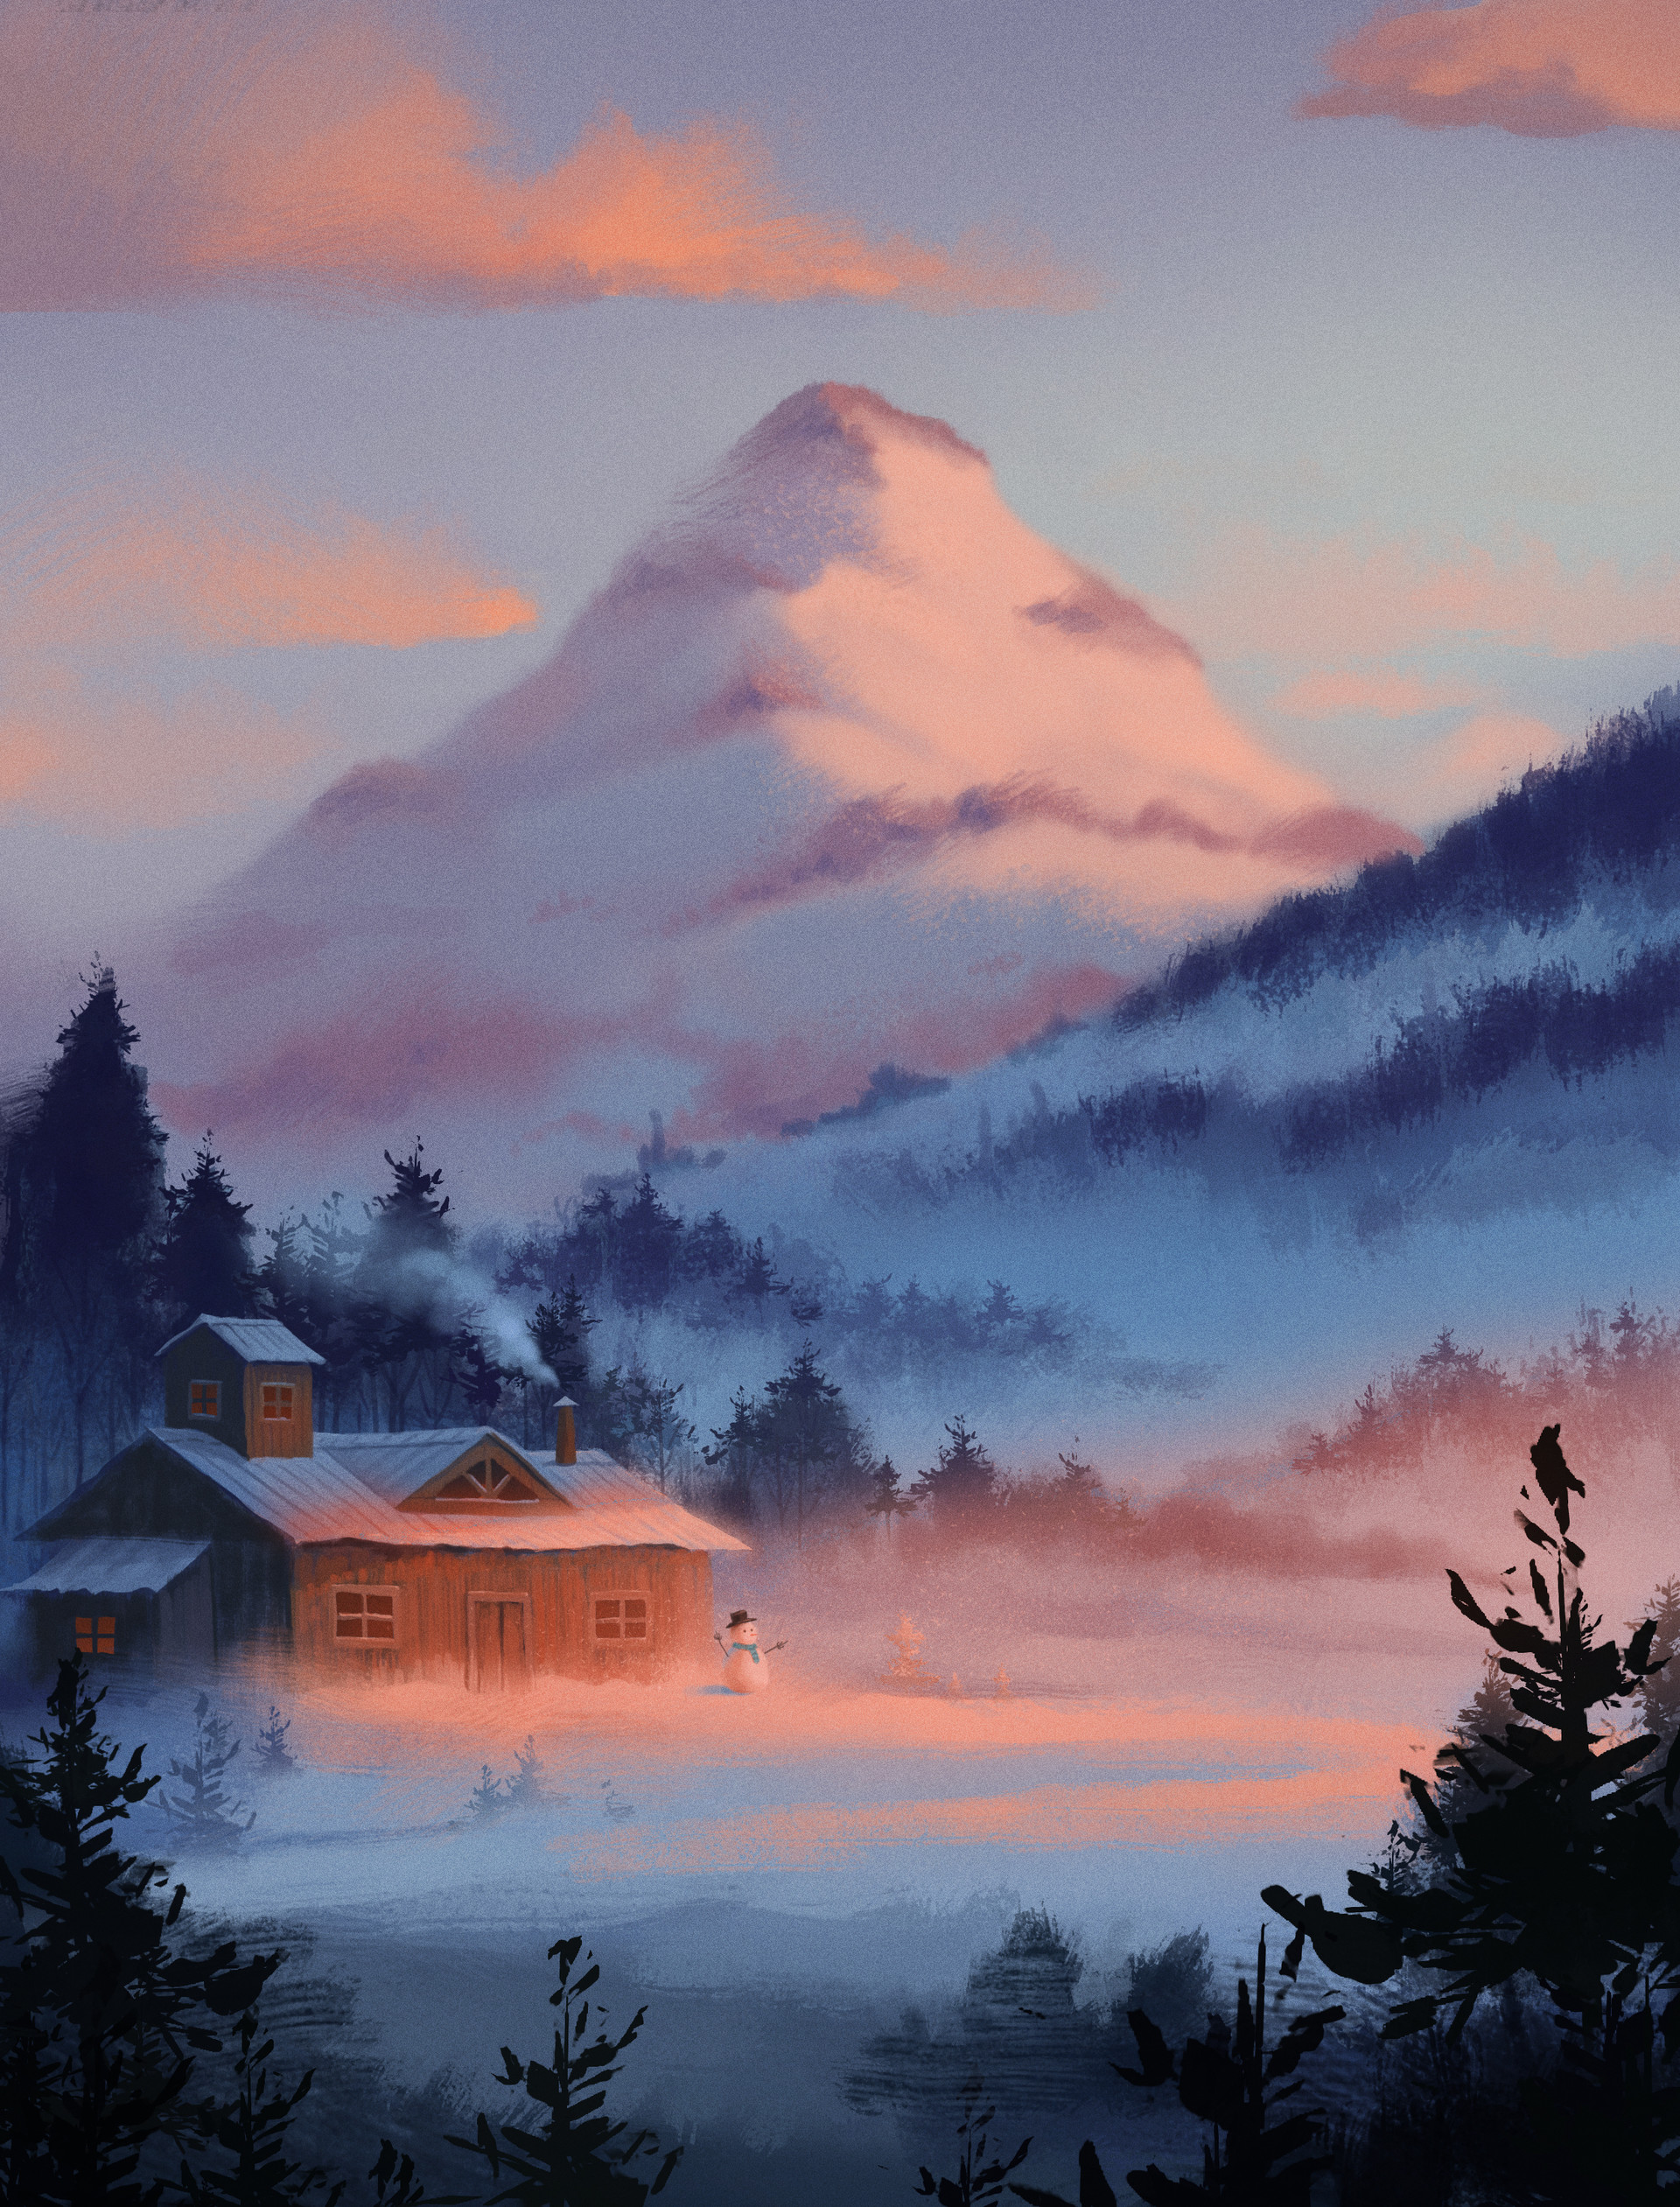 snow, winter, art, mountains, new year, christmas, small house, lodge